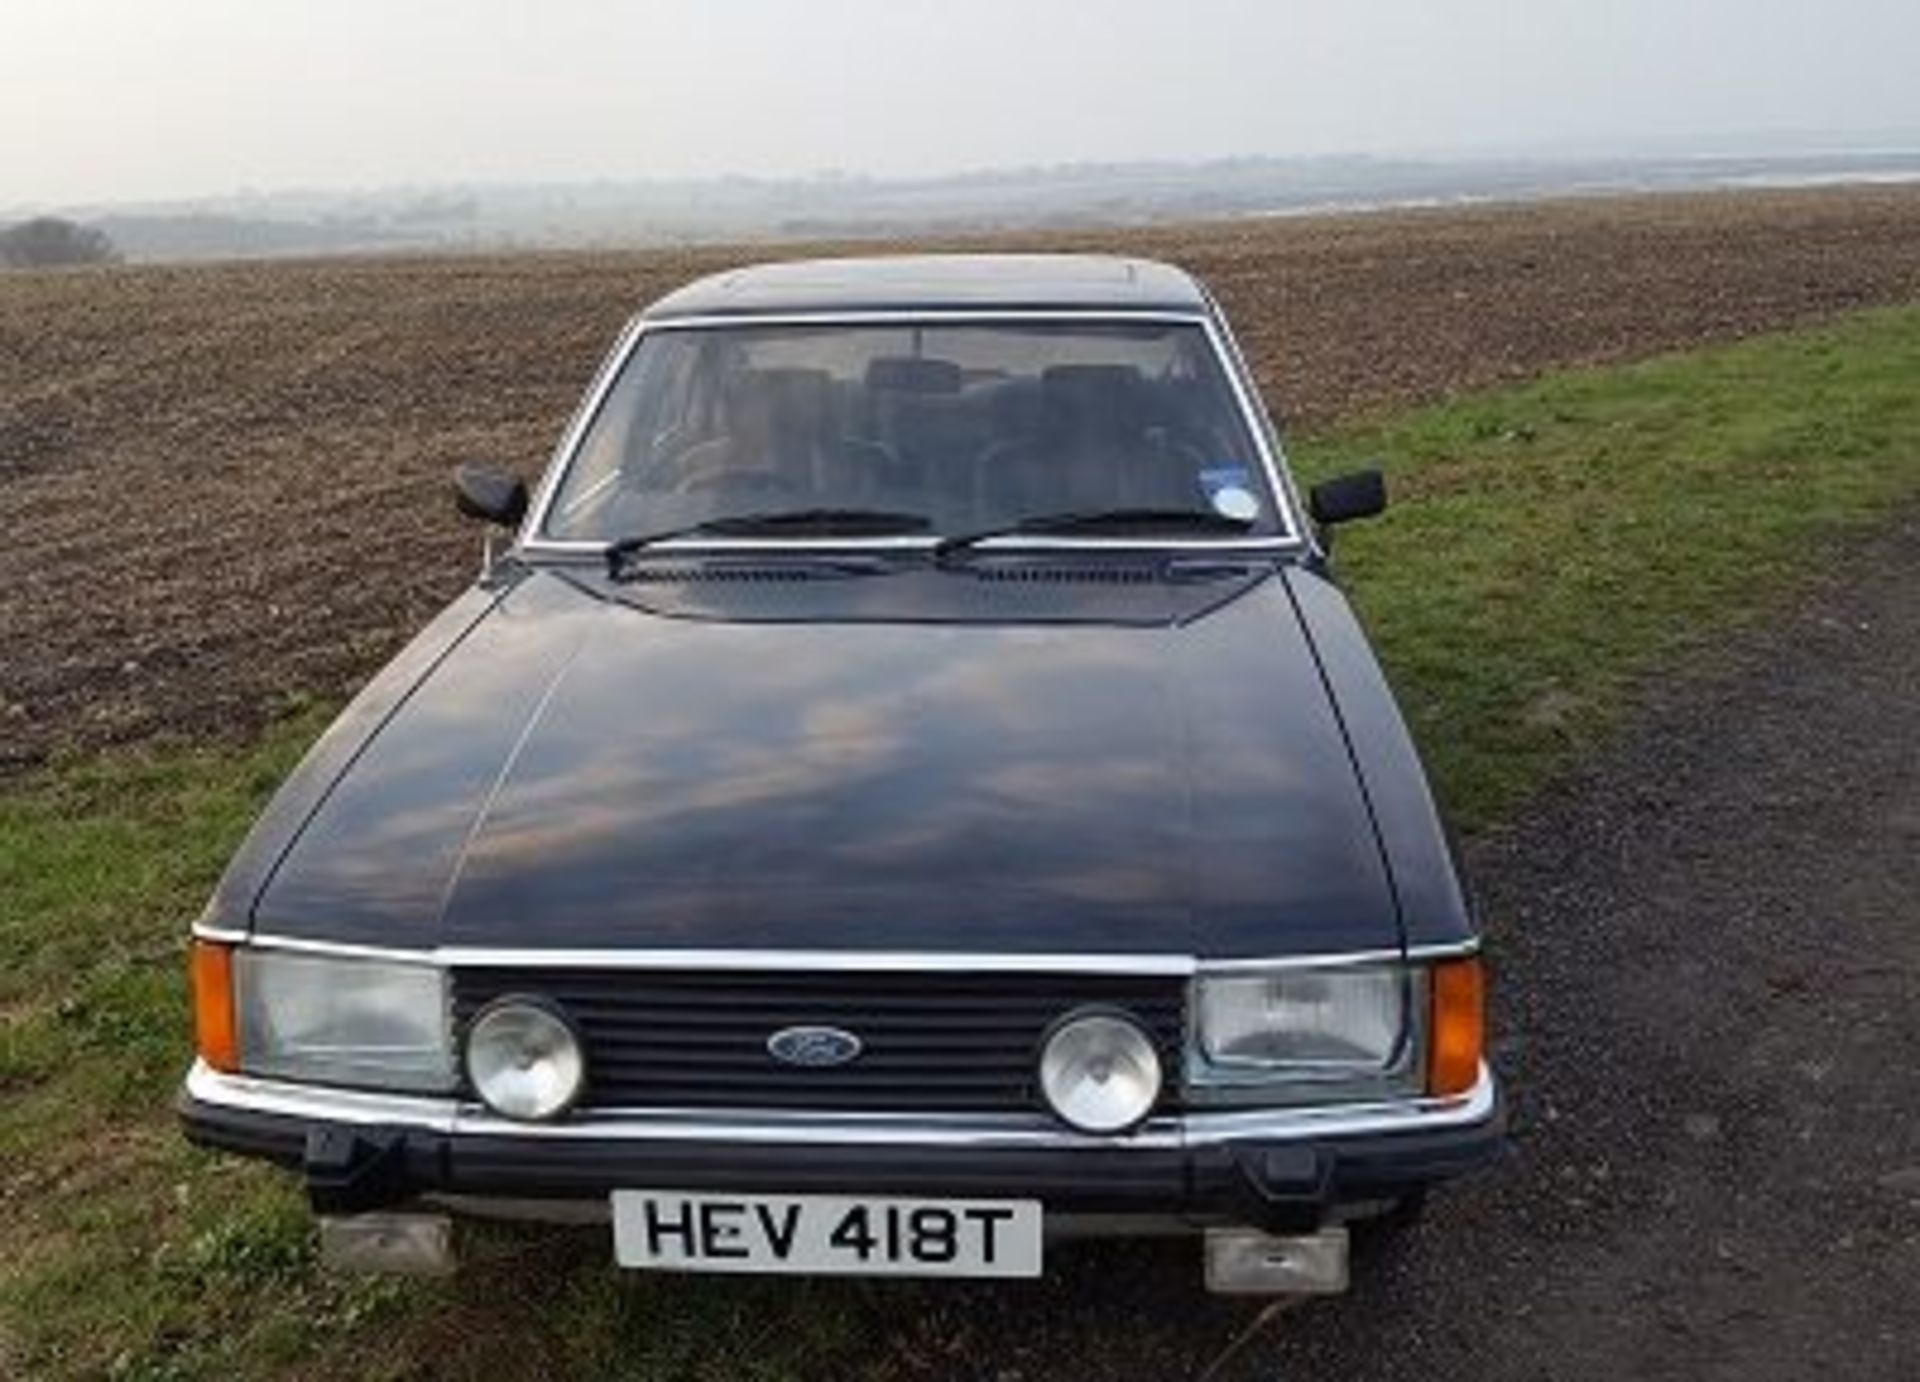 Ford Granada 2.8 Ghia “Sapphire” 1979 - We are pleased to say that the vendor of this rare of rare - Image 4 of 13